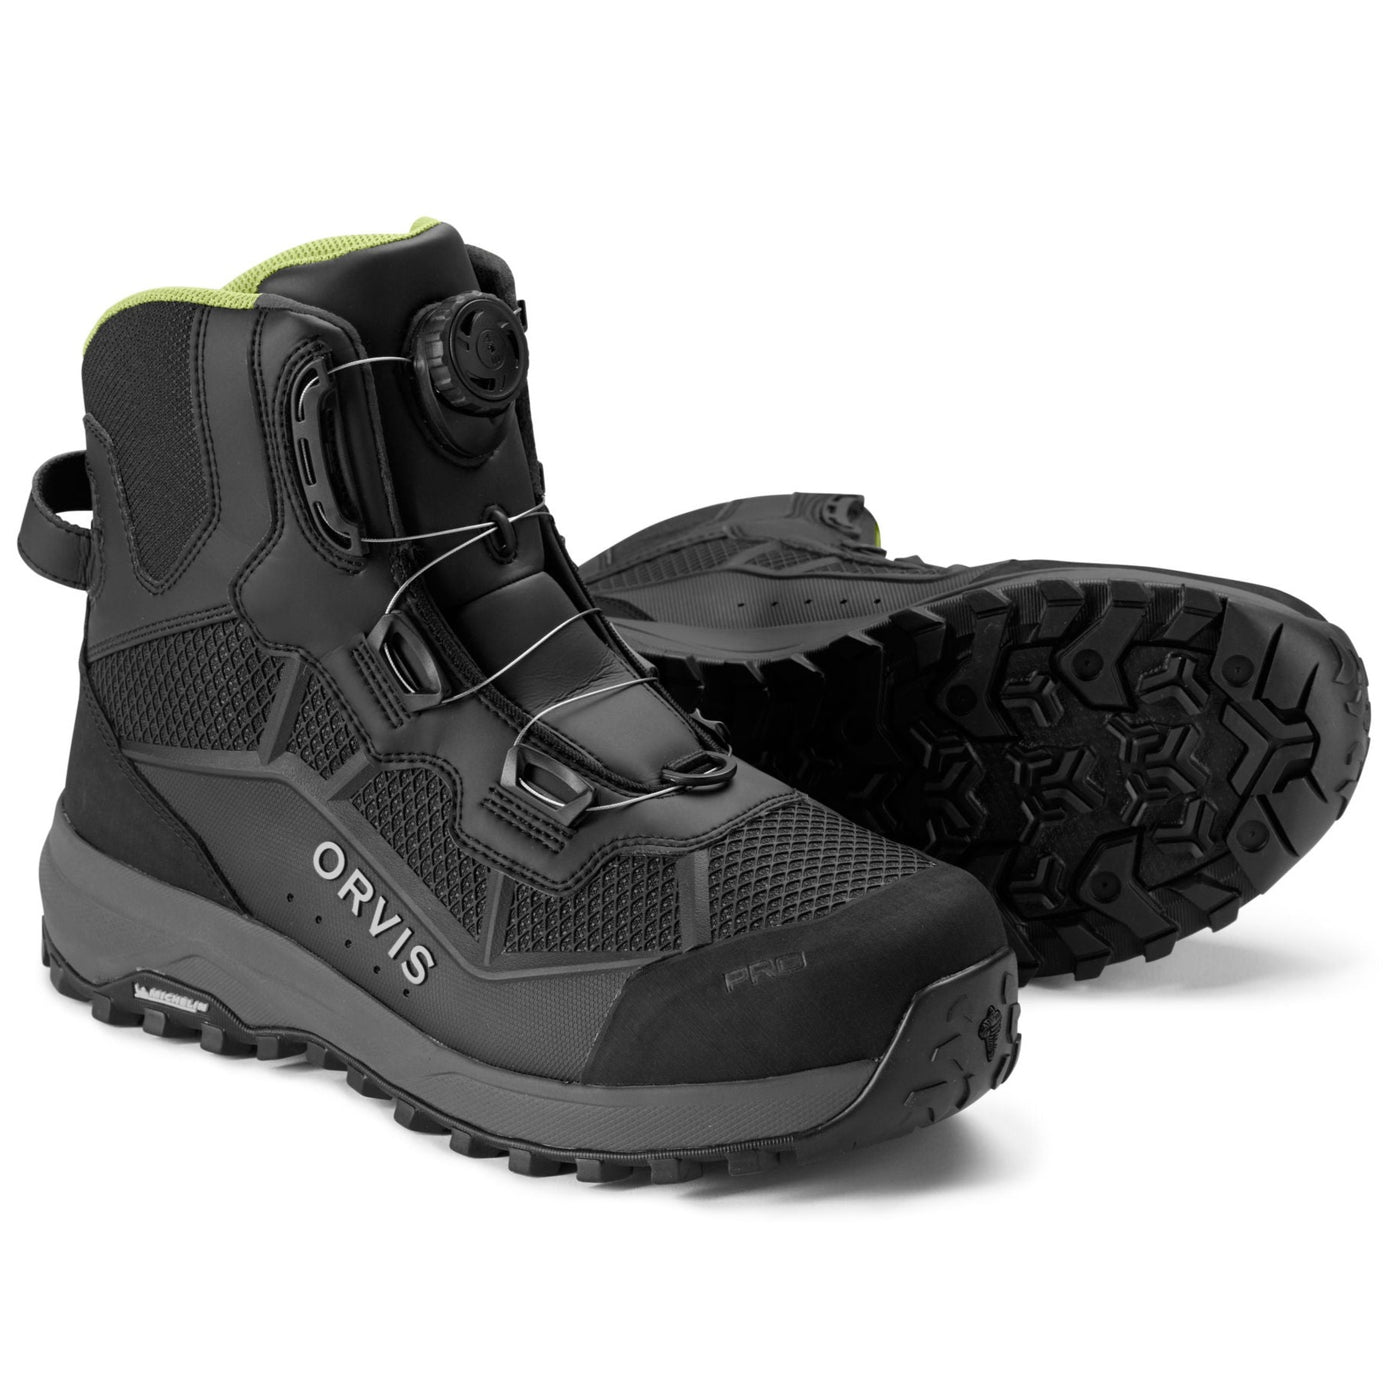 Review: Orvis PRO Approach wet wading shoe